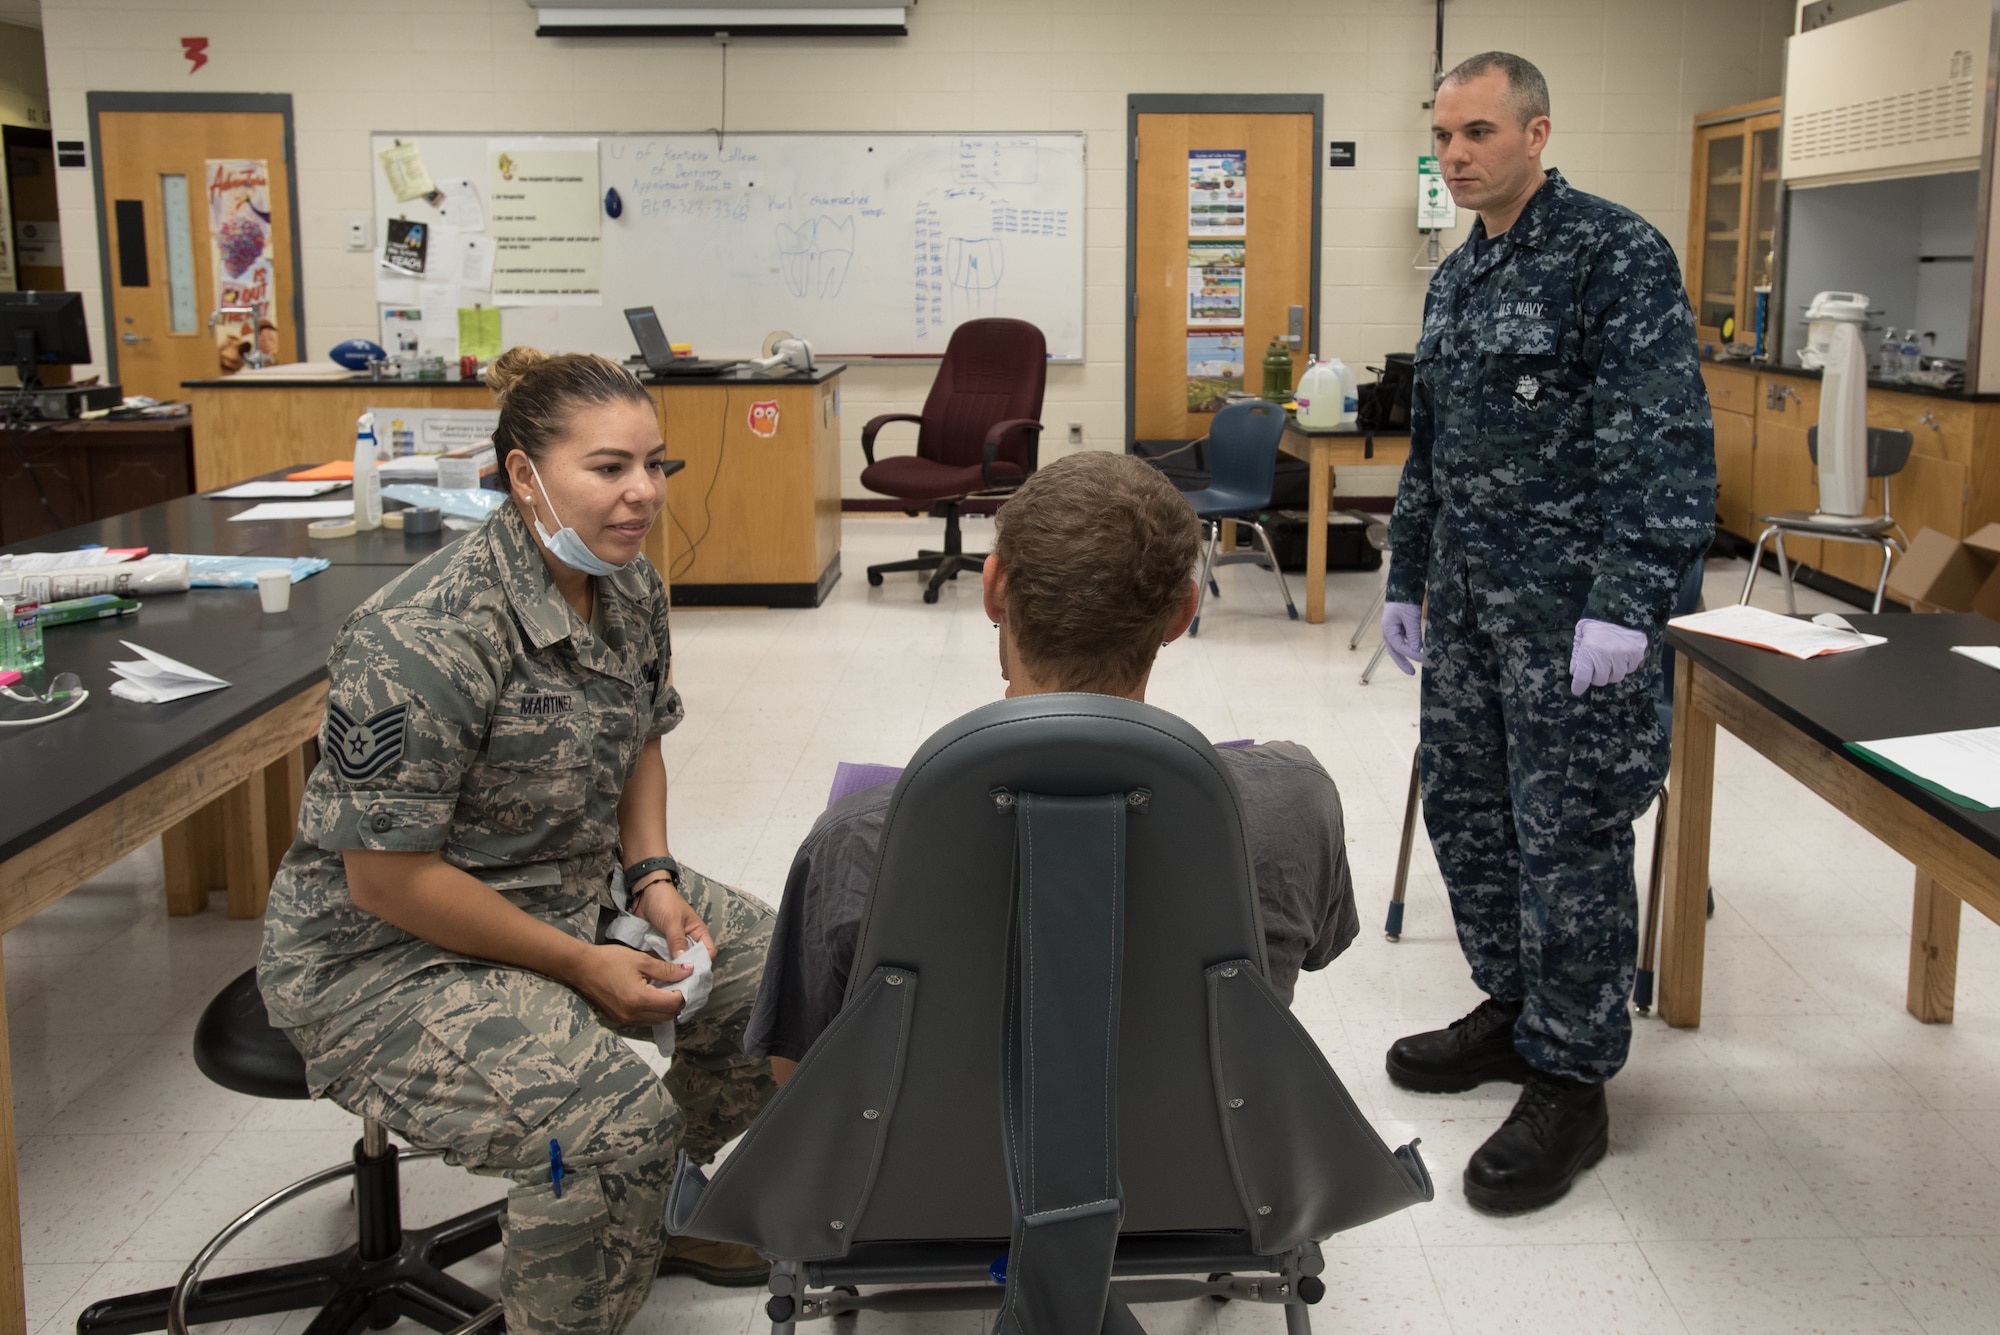 U.S. Air Force Tech. Sgt. Jessica Martinez (left), a dental technician from the Iowa Air National Guard’s 185th Refueling Wing, and U.S. Navy HM3 Jason Dow, a corpsman from Expeditionary Medical Facility Bethesda in Maryland, talk with a dental patient at a health-care clinic at Owsley County High School in Booneville, Ky., June 24, 2018. The clinic is one of four that comprised Operation Bobcat, a 10-day mission to provide military medical troops with crucial training in field operations and logistics while offering no-cost health care to the residents of Eastern Kentucky. The clinics, which operated from June 15-24, offered non-emergent medical care; sports physicals; dental cleanings, fillings and extractions; eye exams and no-cost prescription eye glasses. (U.S. Air National Guard photo by Lt. Col. Dale Greer)